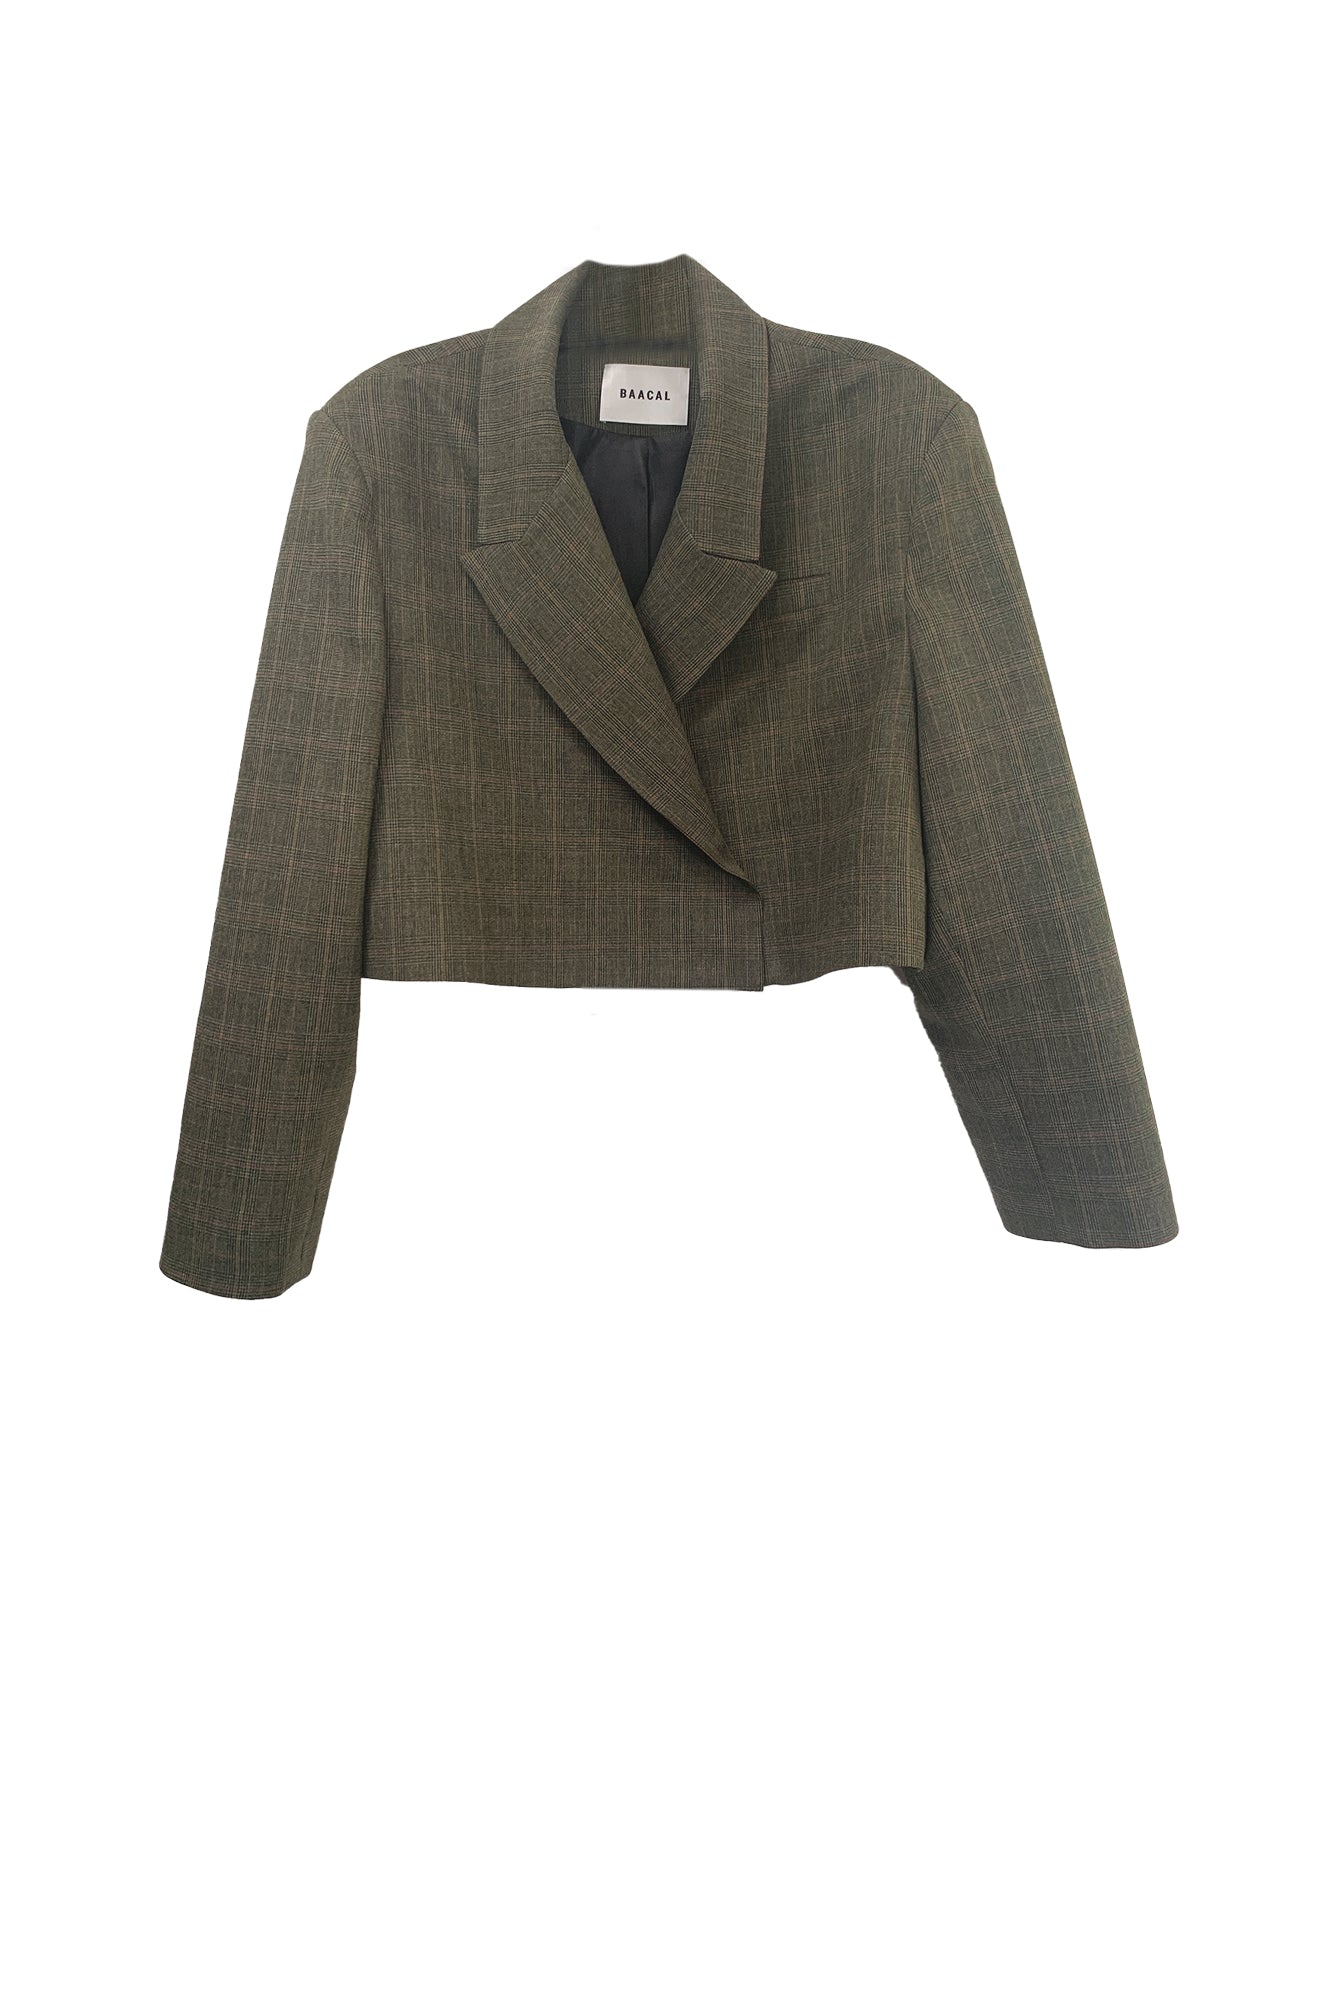 The Crop Blazer is offered here in a  subtle Green Grey Prince of Wales plaid. The best Item to update your Fall wardrobe.  Perfect to wear open or closed with inside hidden buttons.   Made of a lightweight Wool blend, double-breasted with tailored shoulders and buttoned cuffs.  A go-anywhere, anyway favorite you will reach for from Fall through Spring.   This blazer was made using upcycled material and trims made and tailored in Los Angeles. Good for you and good for the planet.